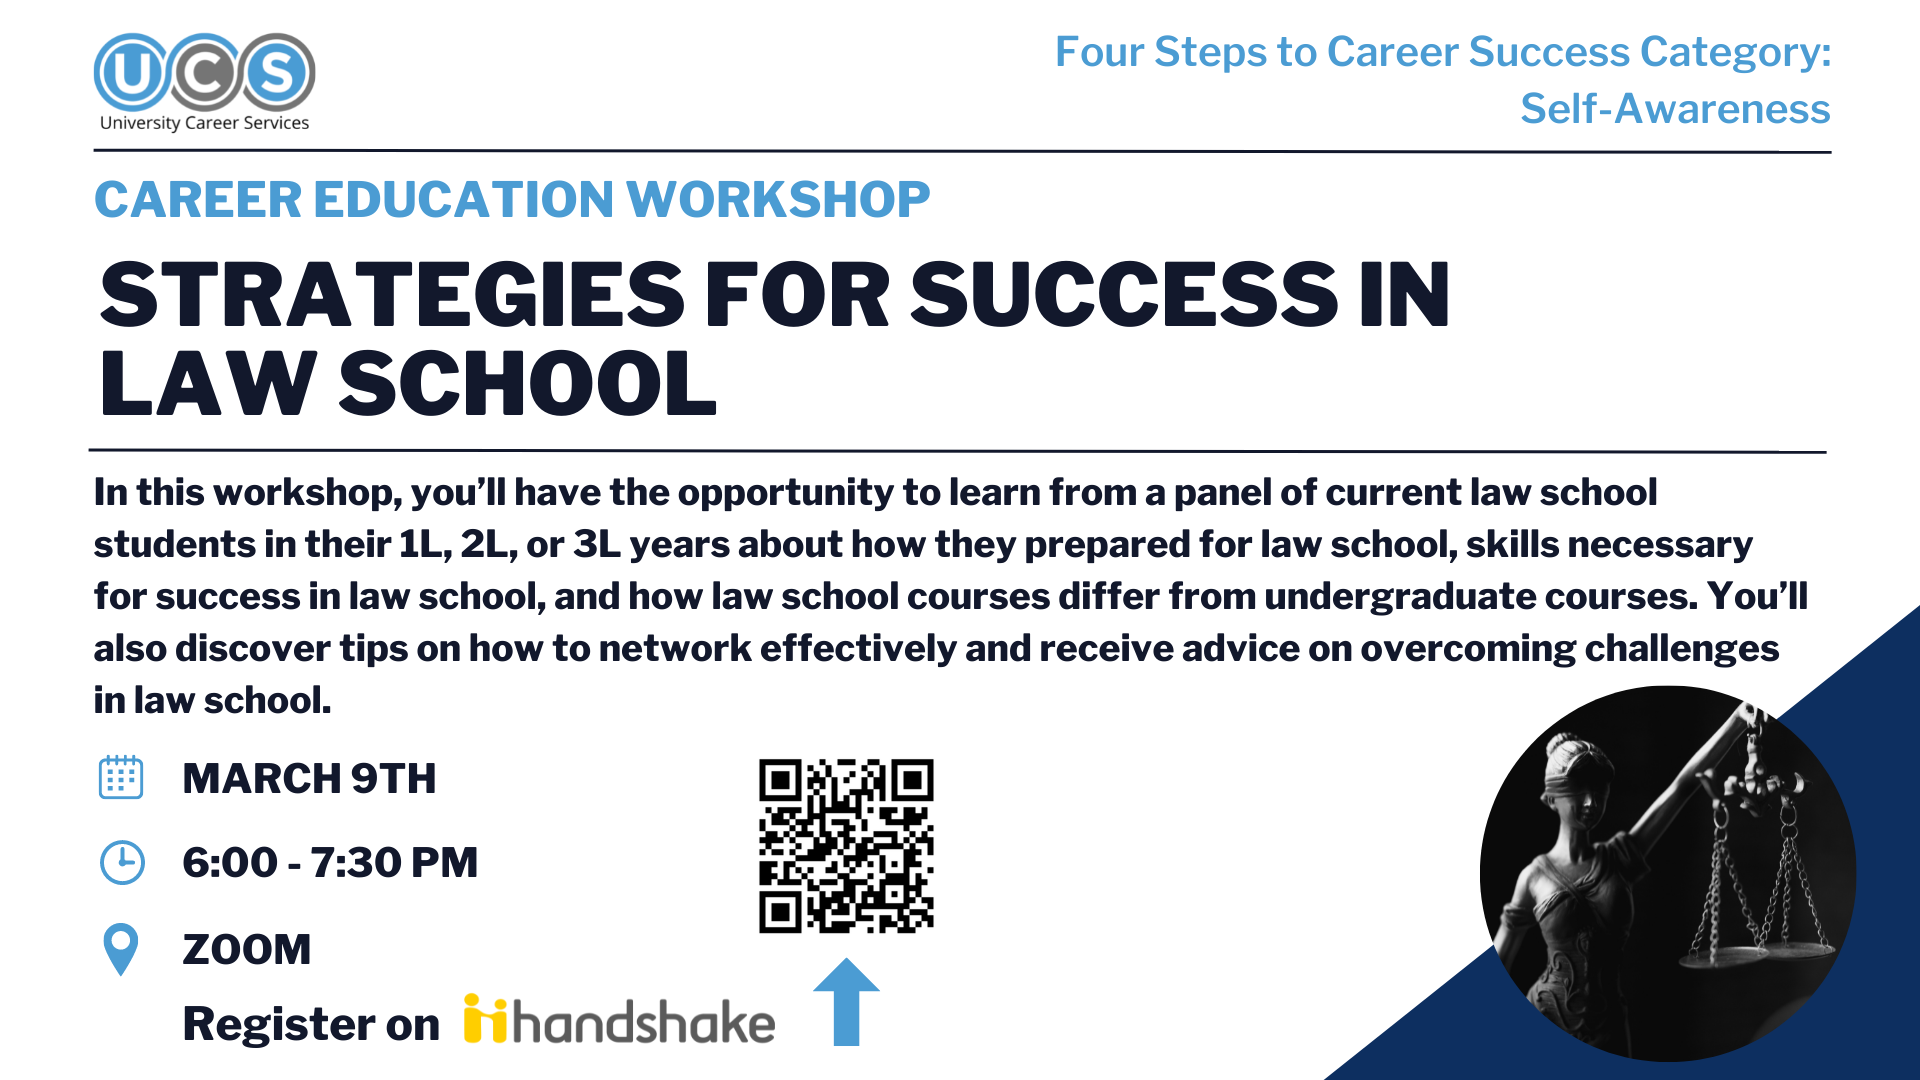 In this workshop, you’ll have the opportunity to learn from a panel of current law school students in their 1L, 2L, or 3L years about how they prepared for law school, skills necessary for success in law school, and how law school courses differ from unde